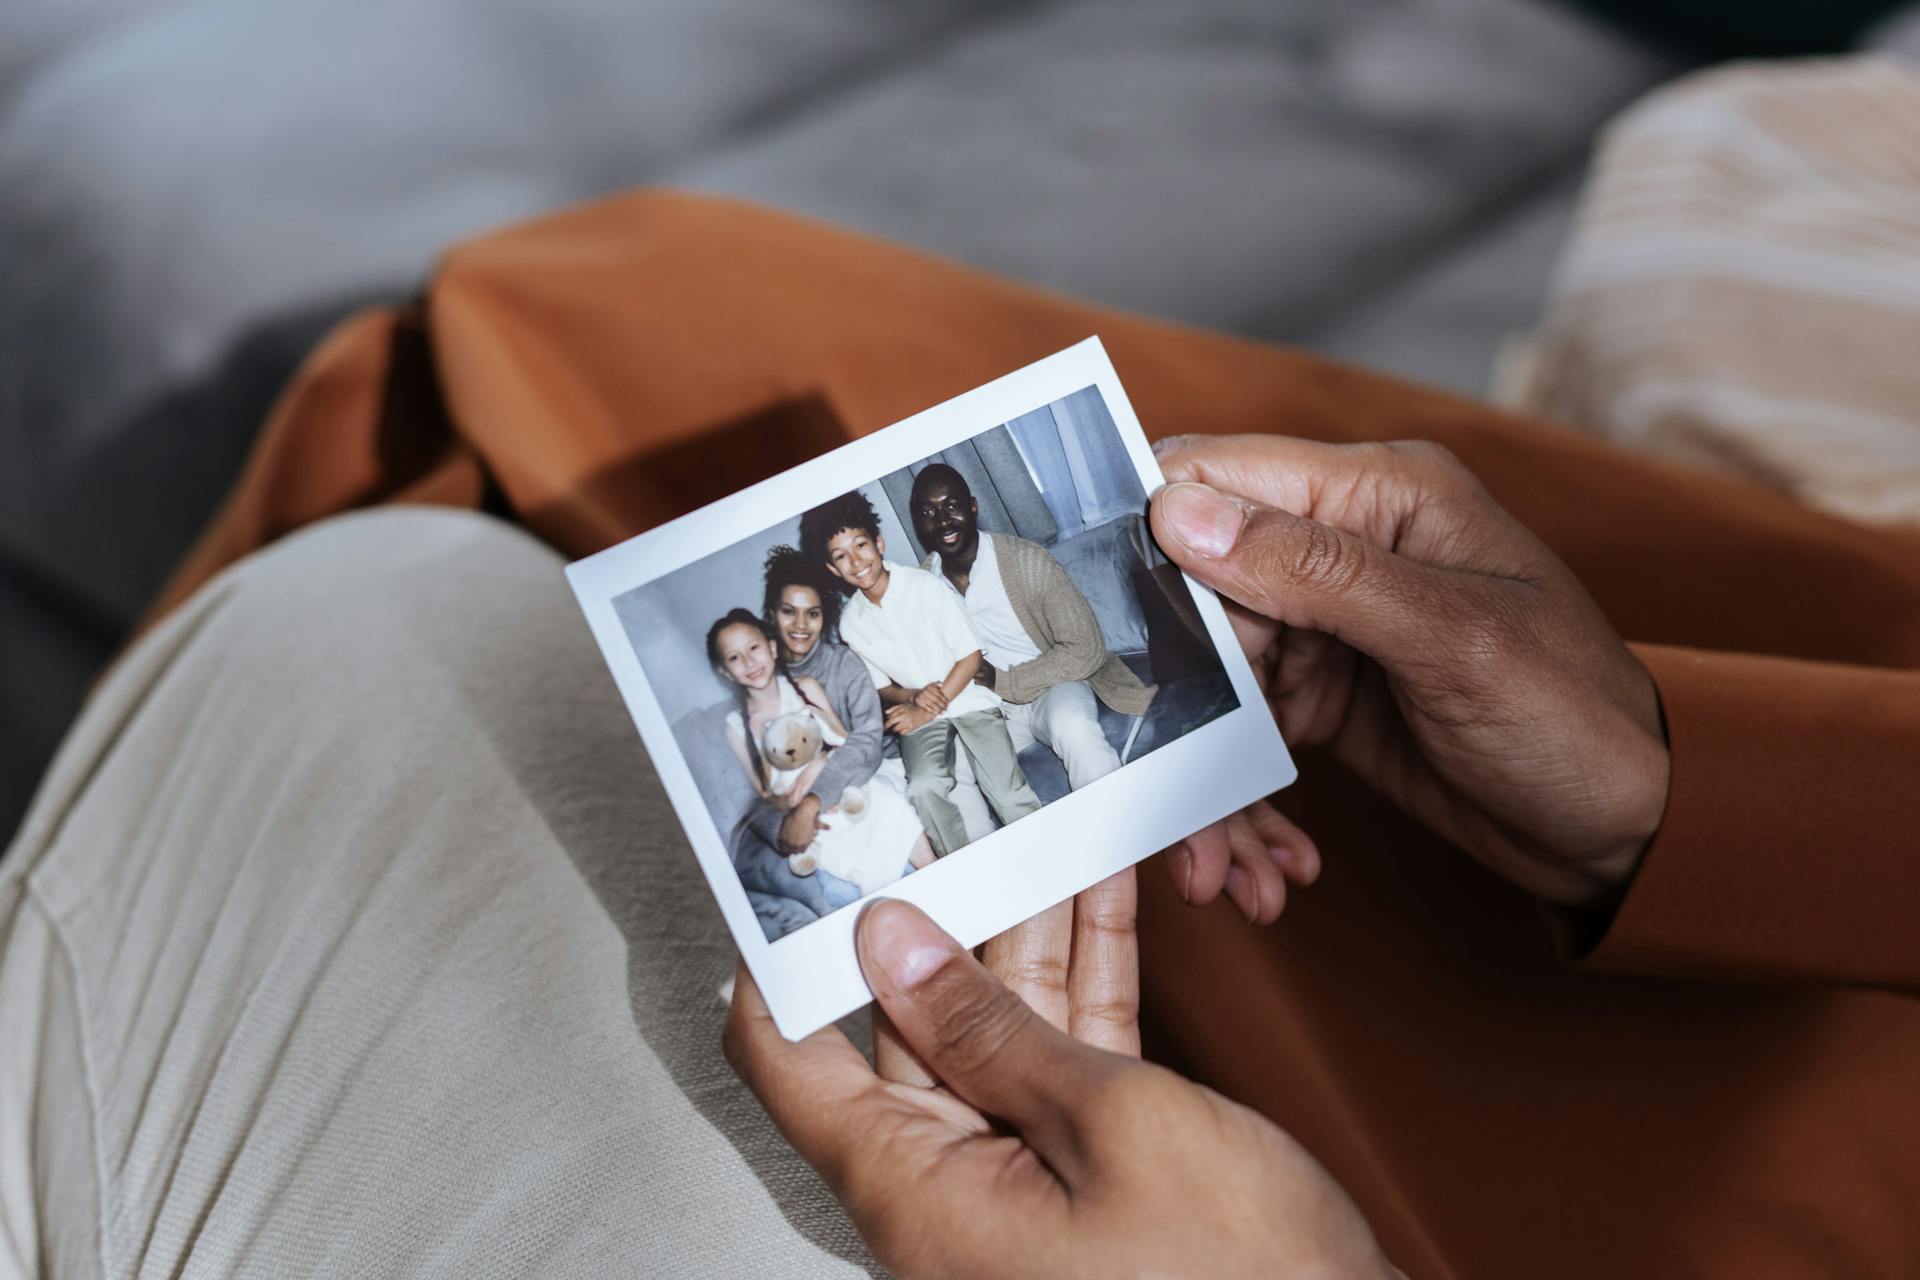 A man holding a family photograph | Source: Pexels